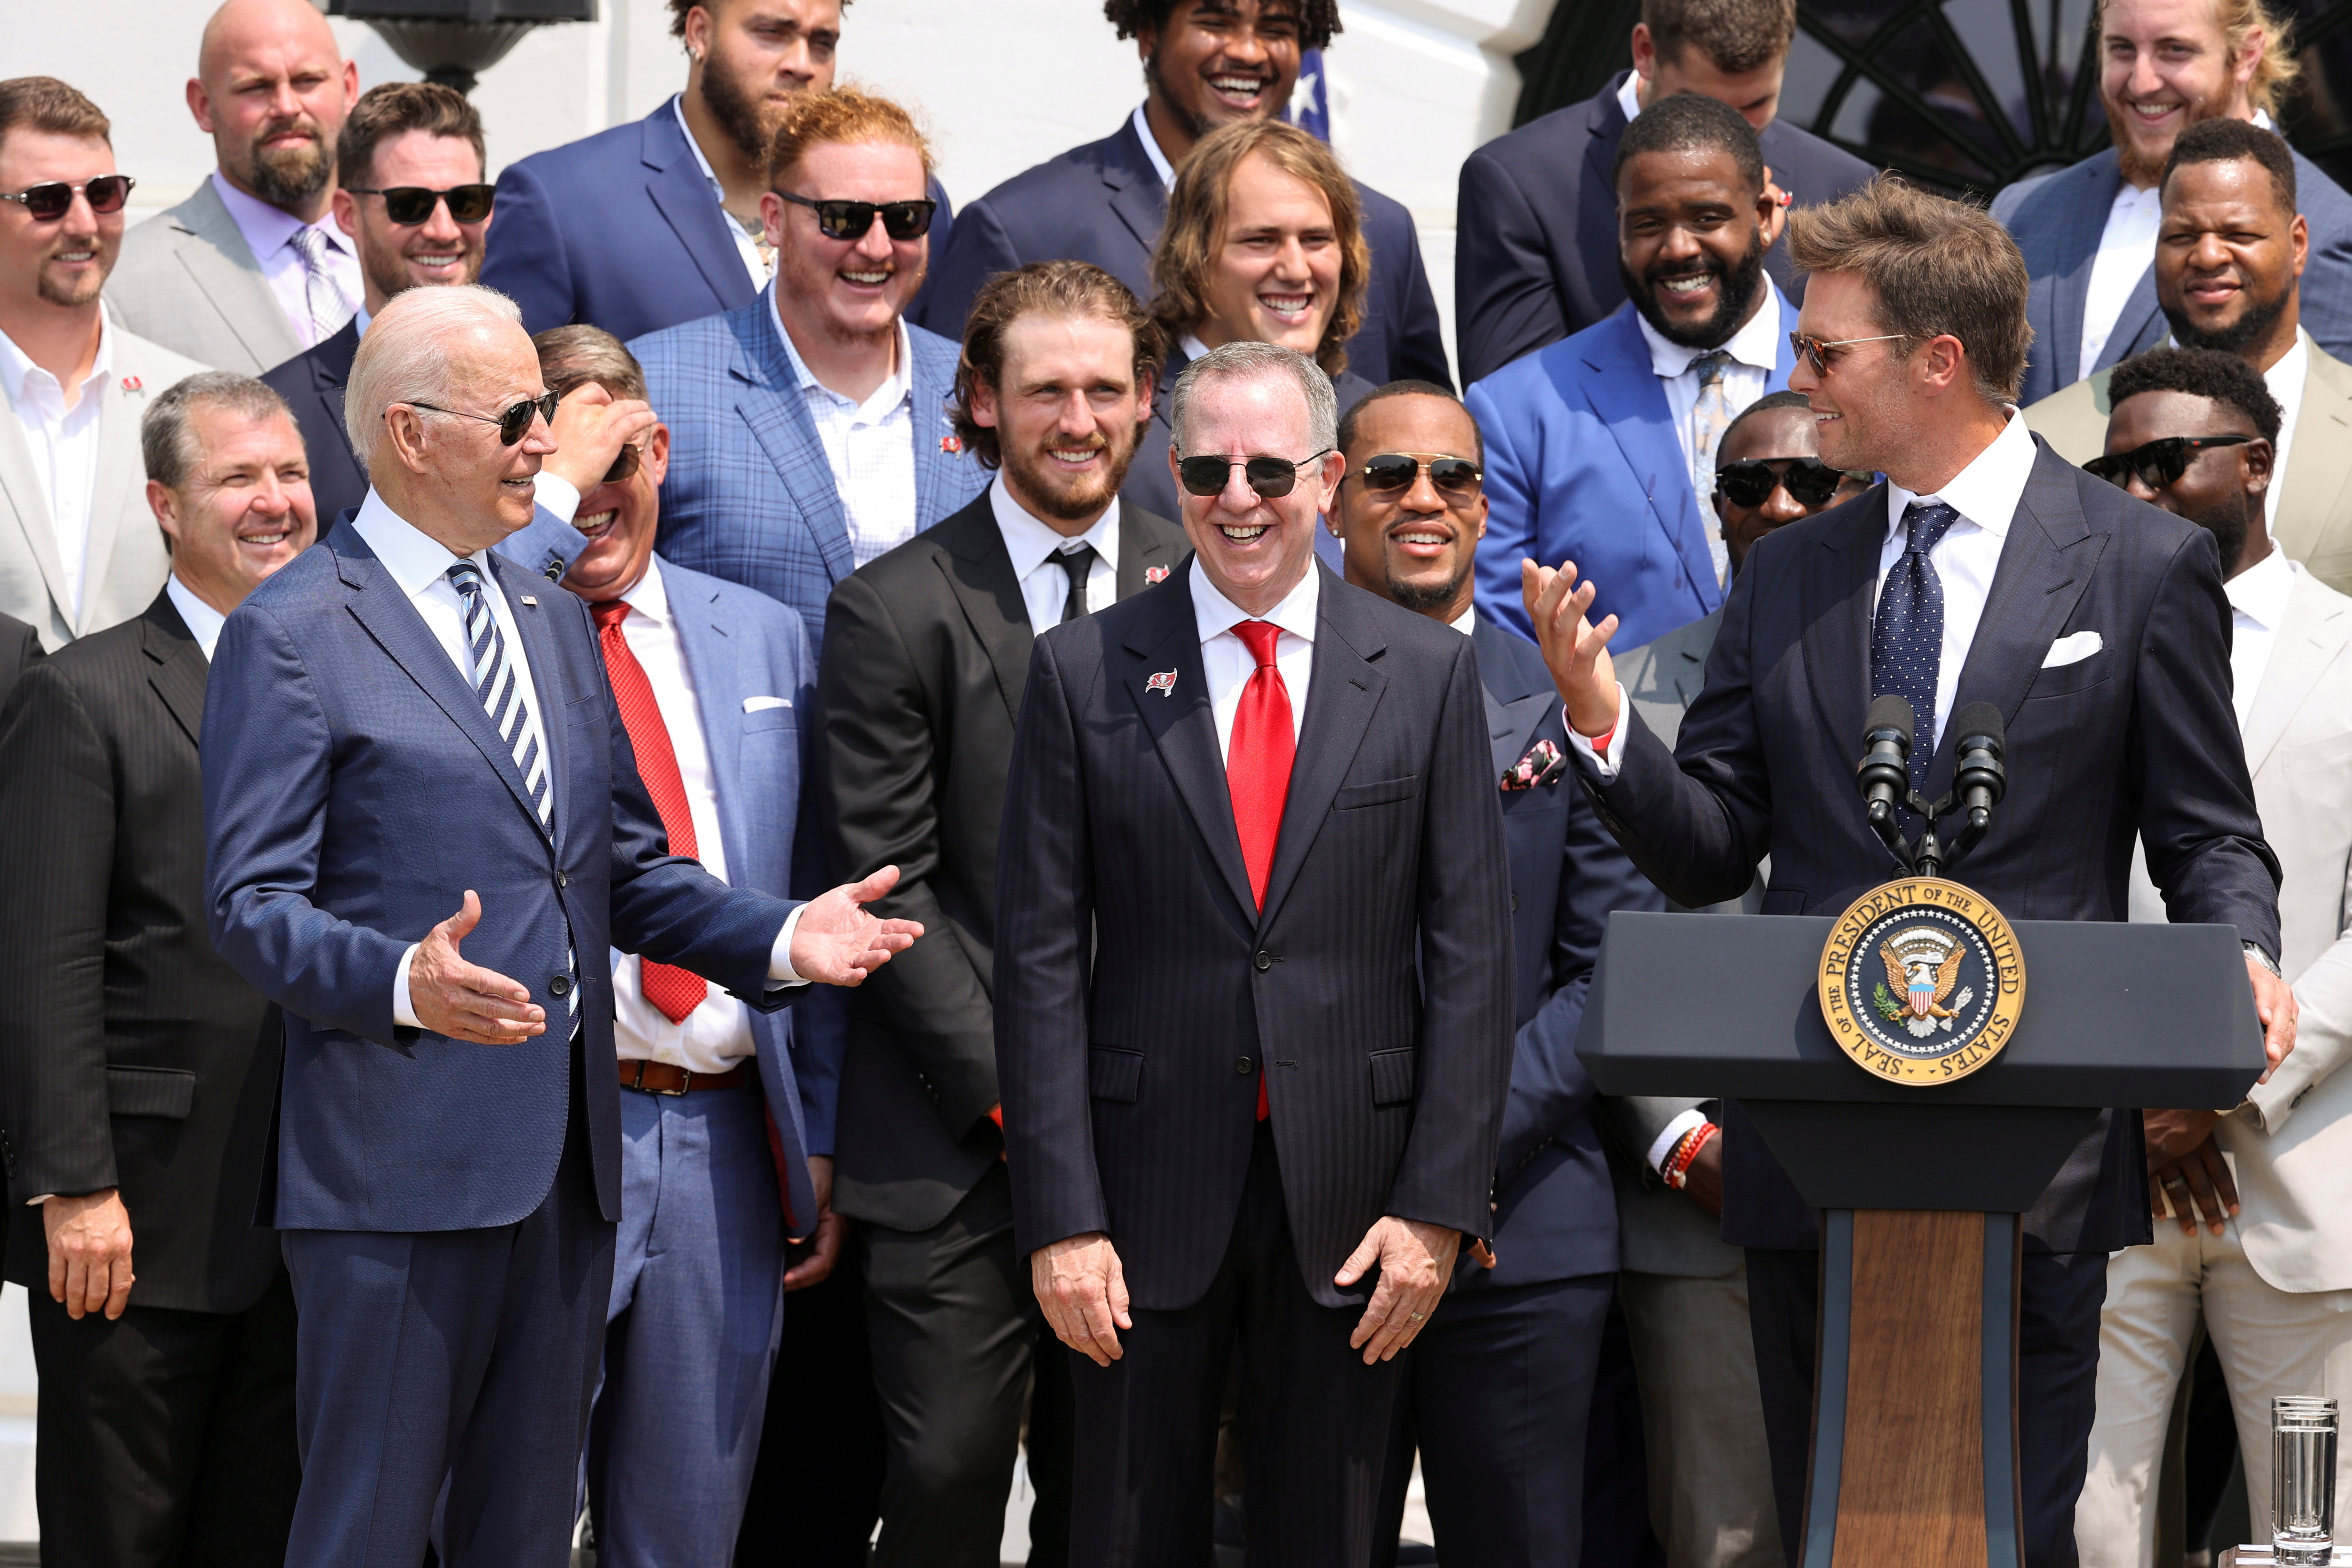 U.S. President Biden welcomes Super Bowl champion Tampa Bay Buccaneers at the White House